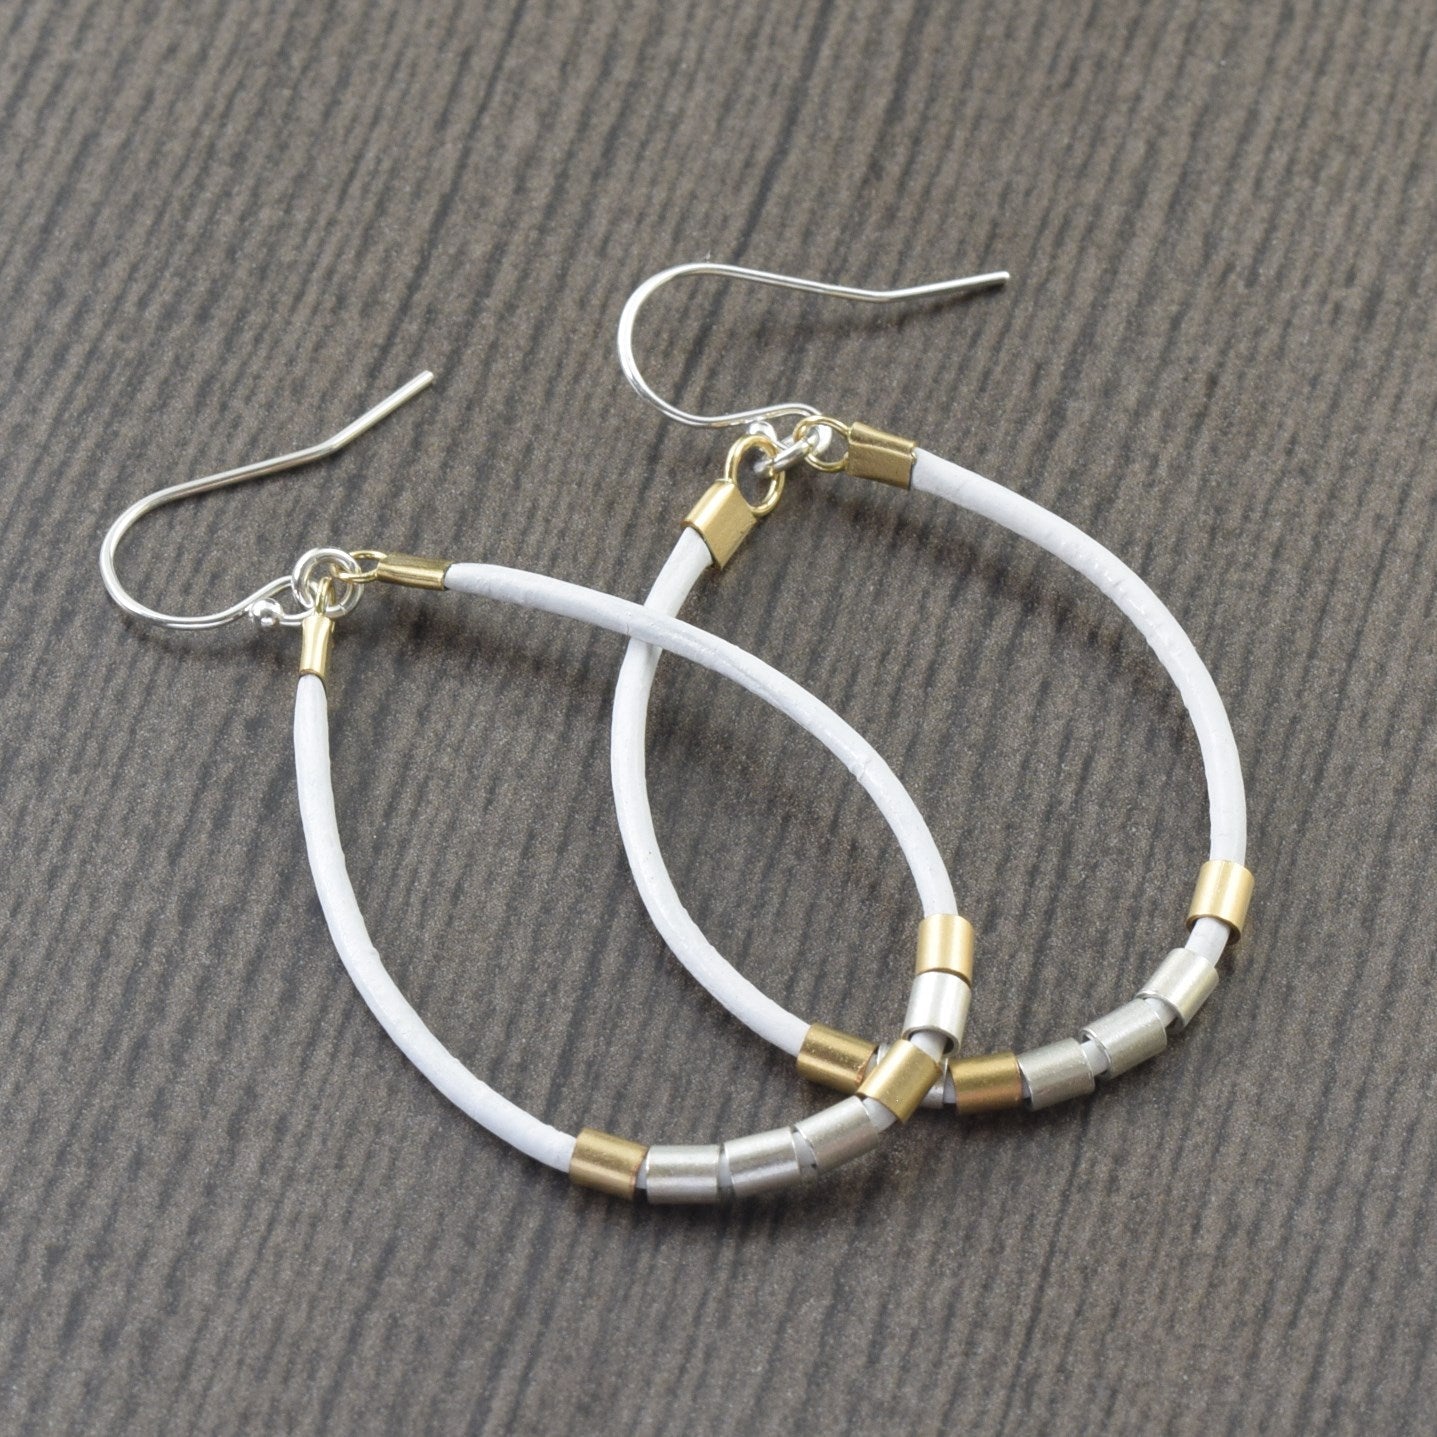 White Leather hoop earrings with gold and sterling silver accents